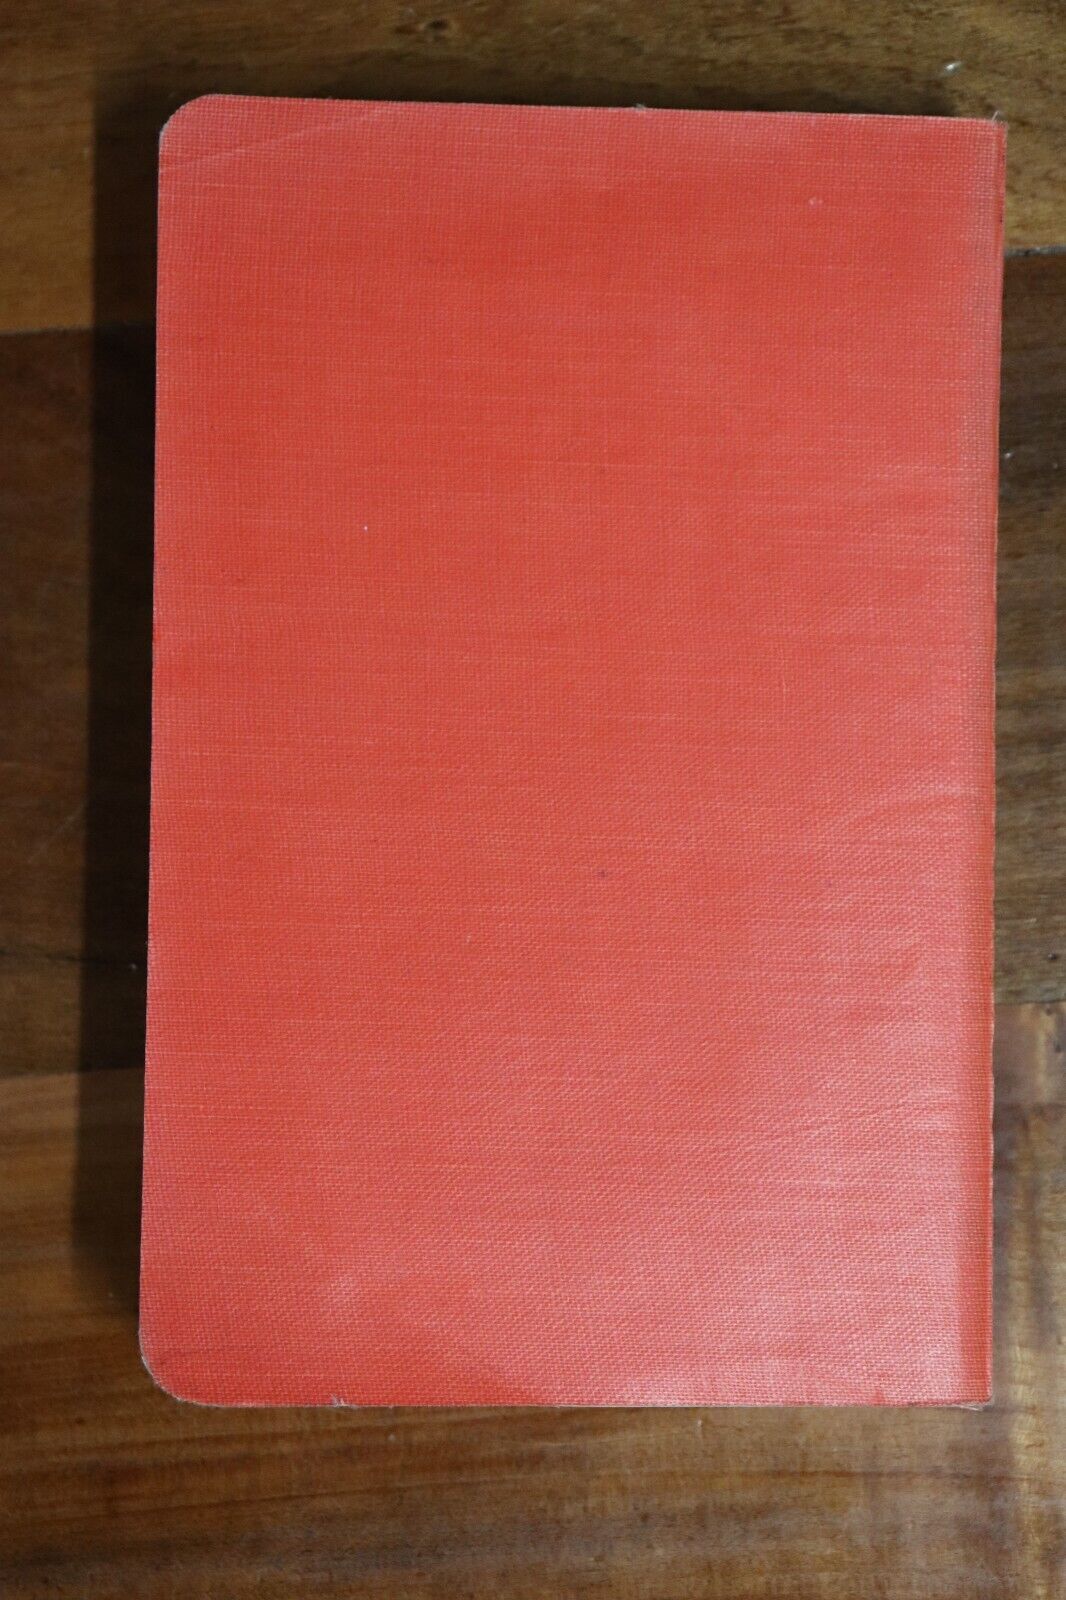 The Architect by Clough Williams-Ellis - 1929 - 1st Ed. Architecture Book